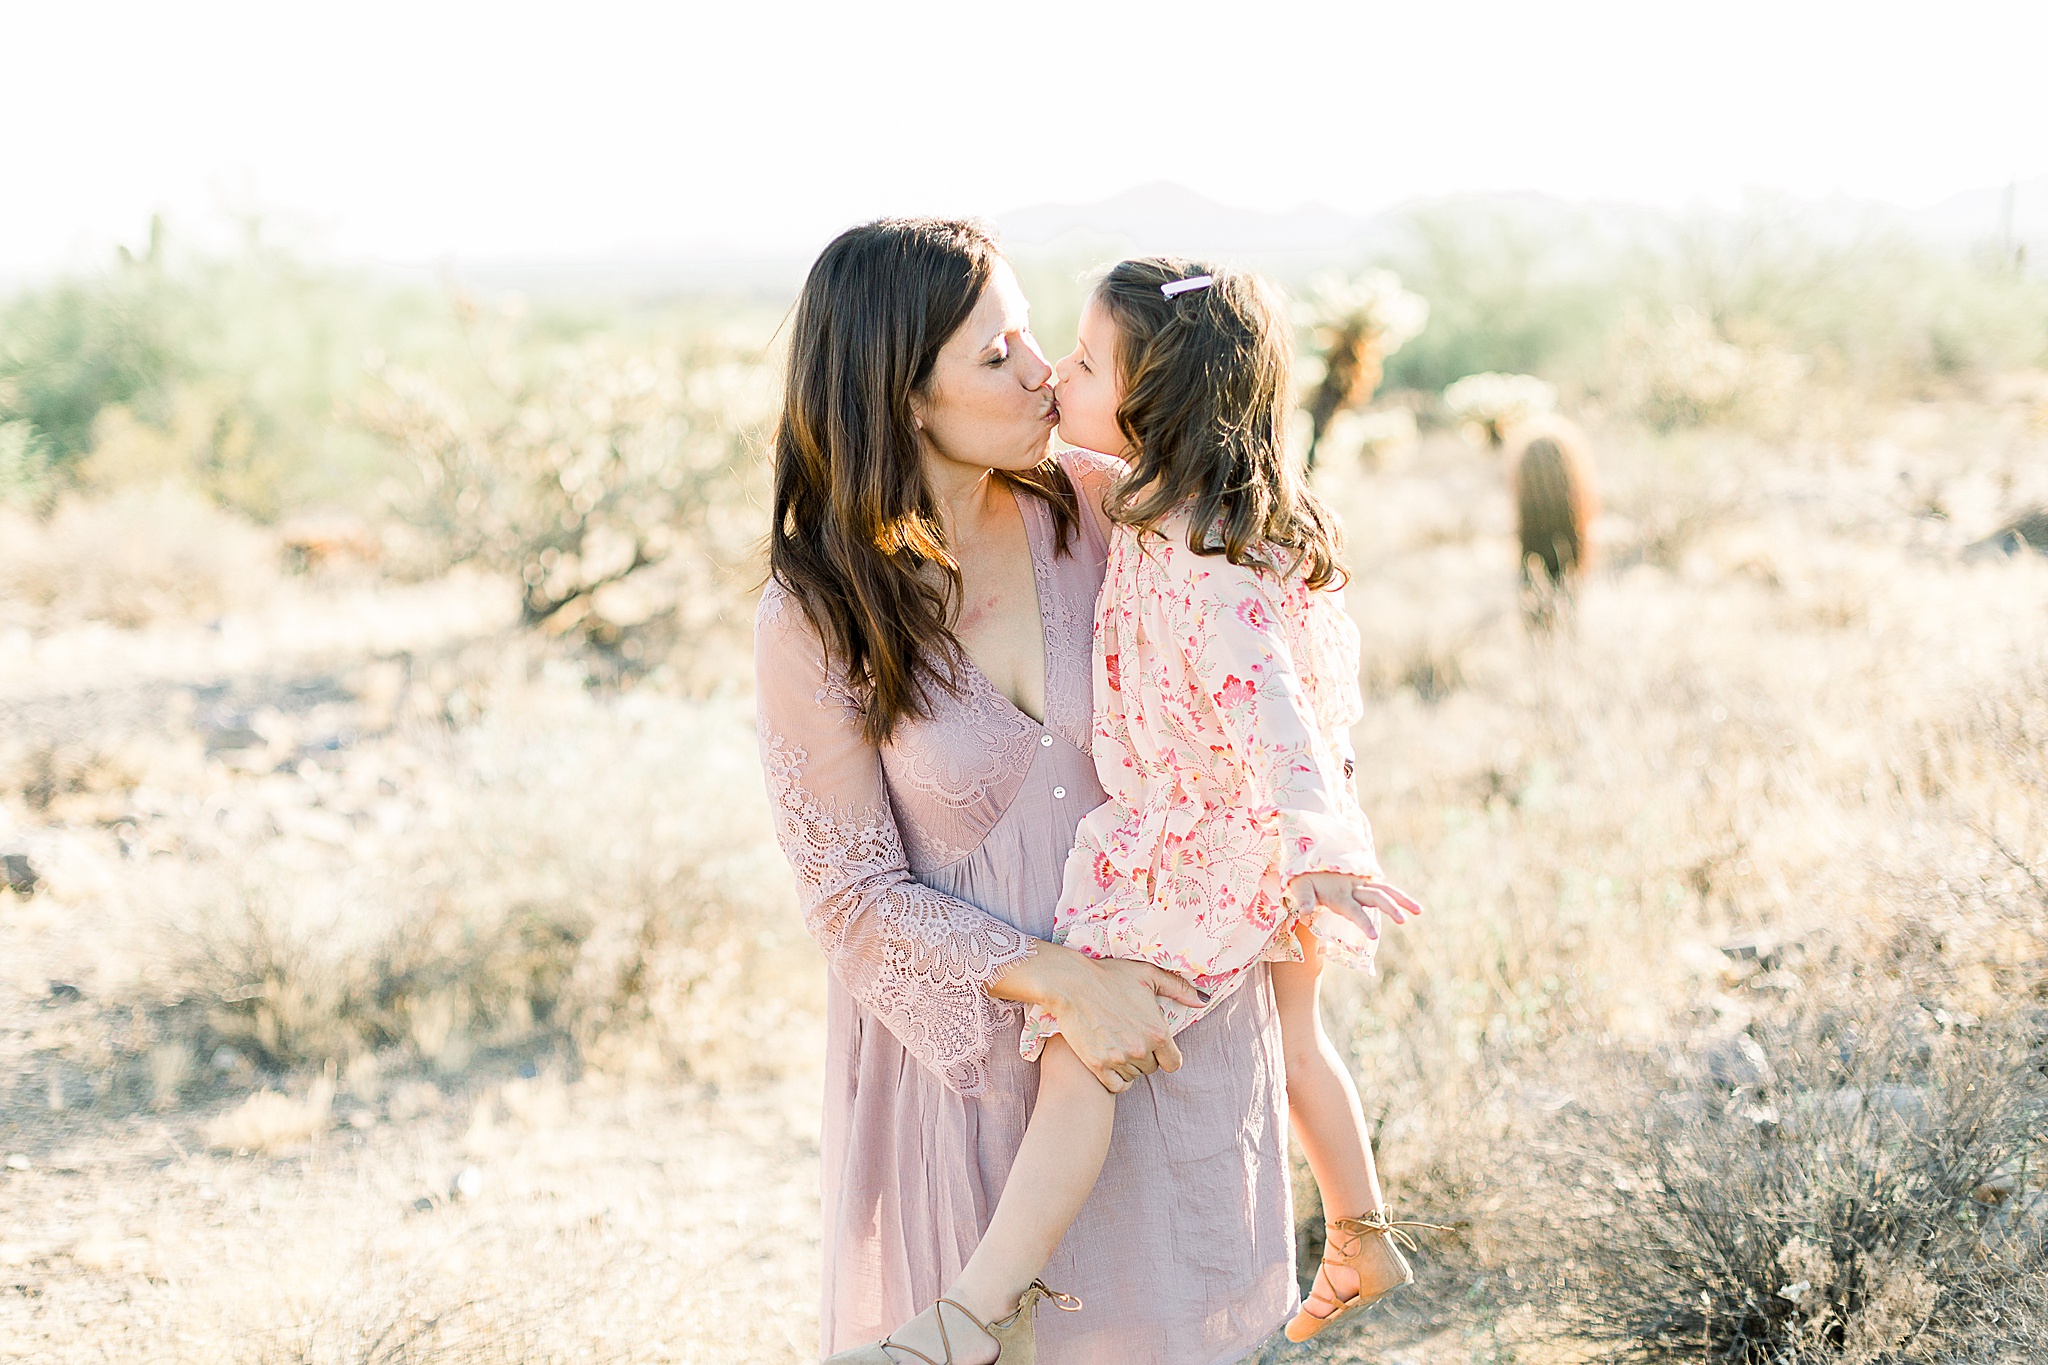 Aly-Kirk-Photo-Mesa-Mommy-Me-Mother-Daughter-Desert-Cactus-Photographer